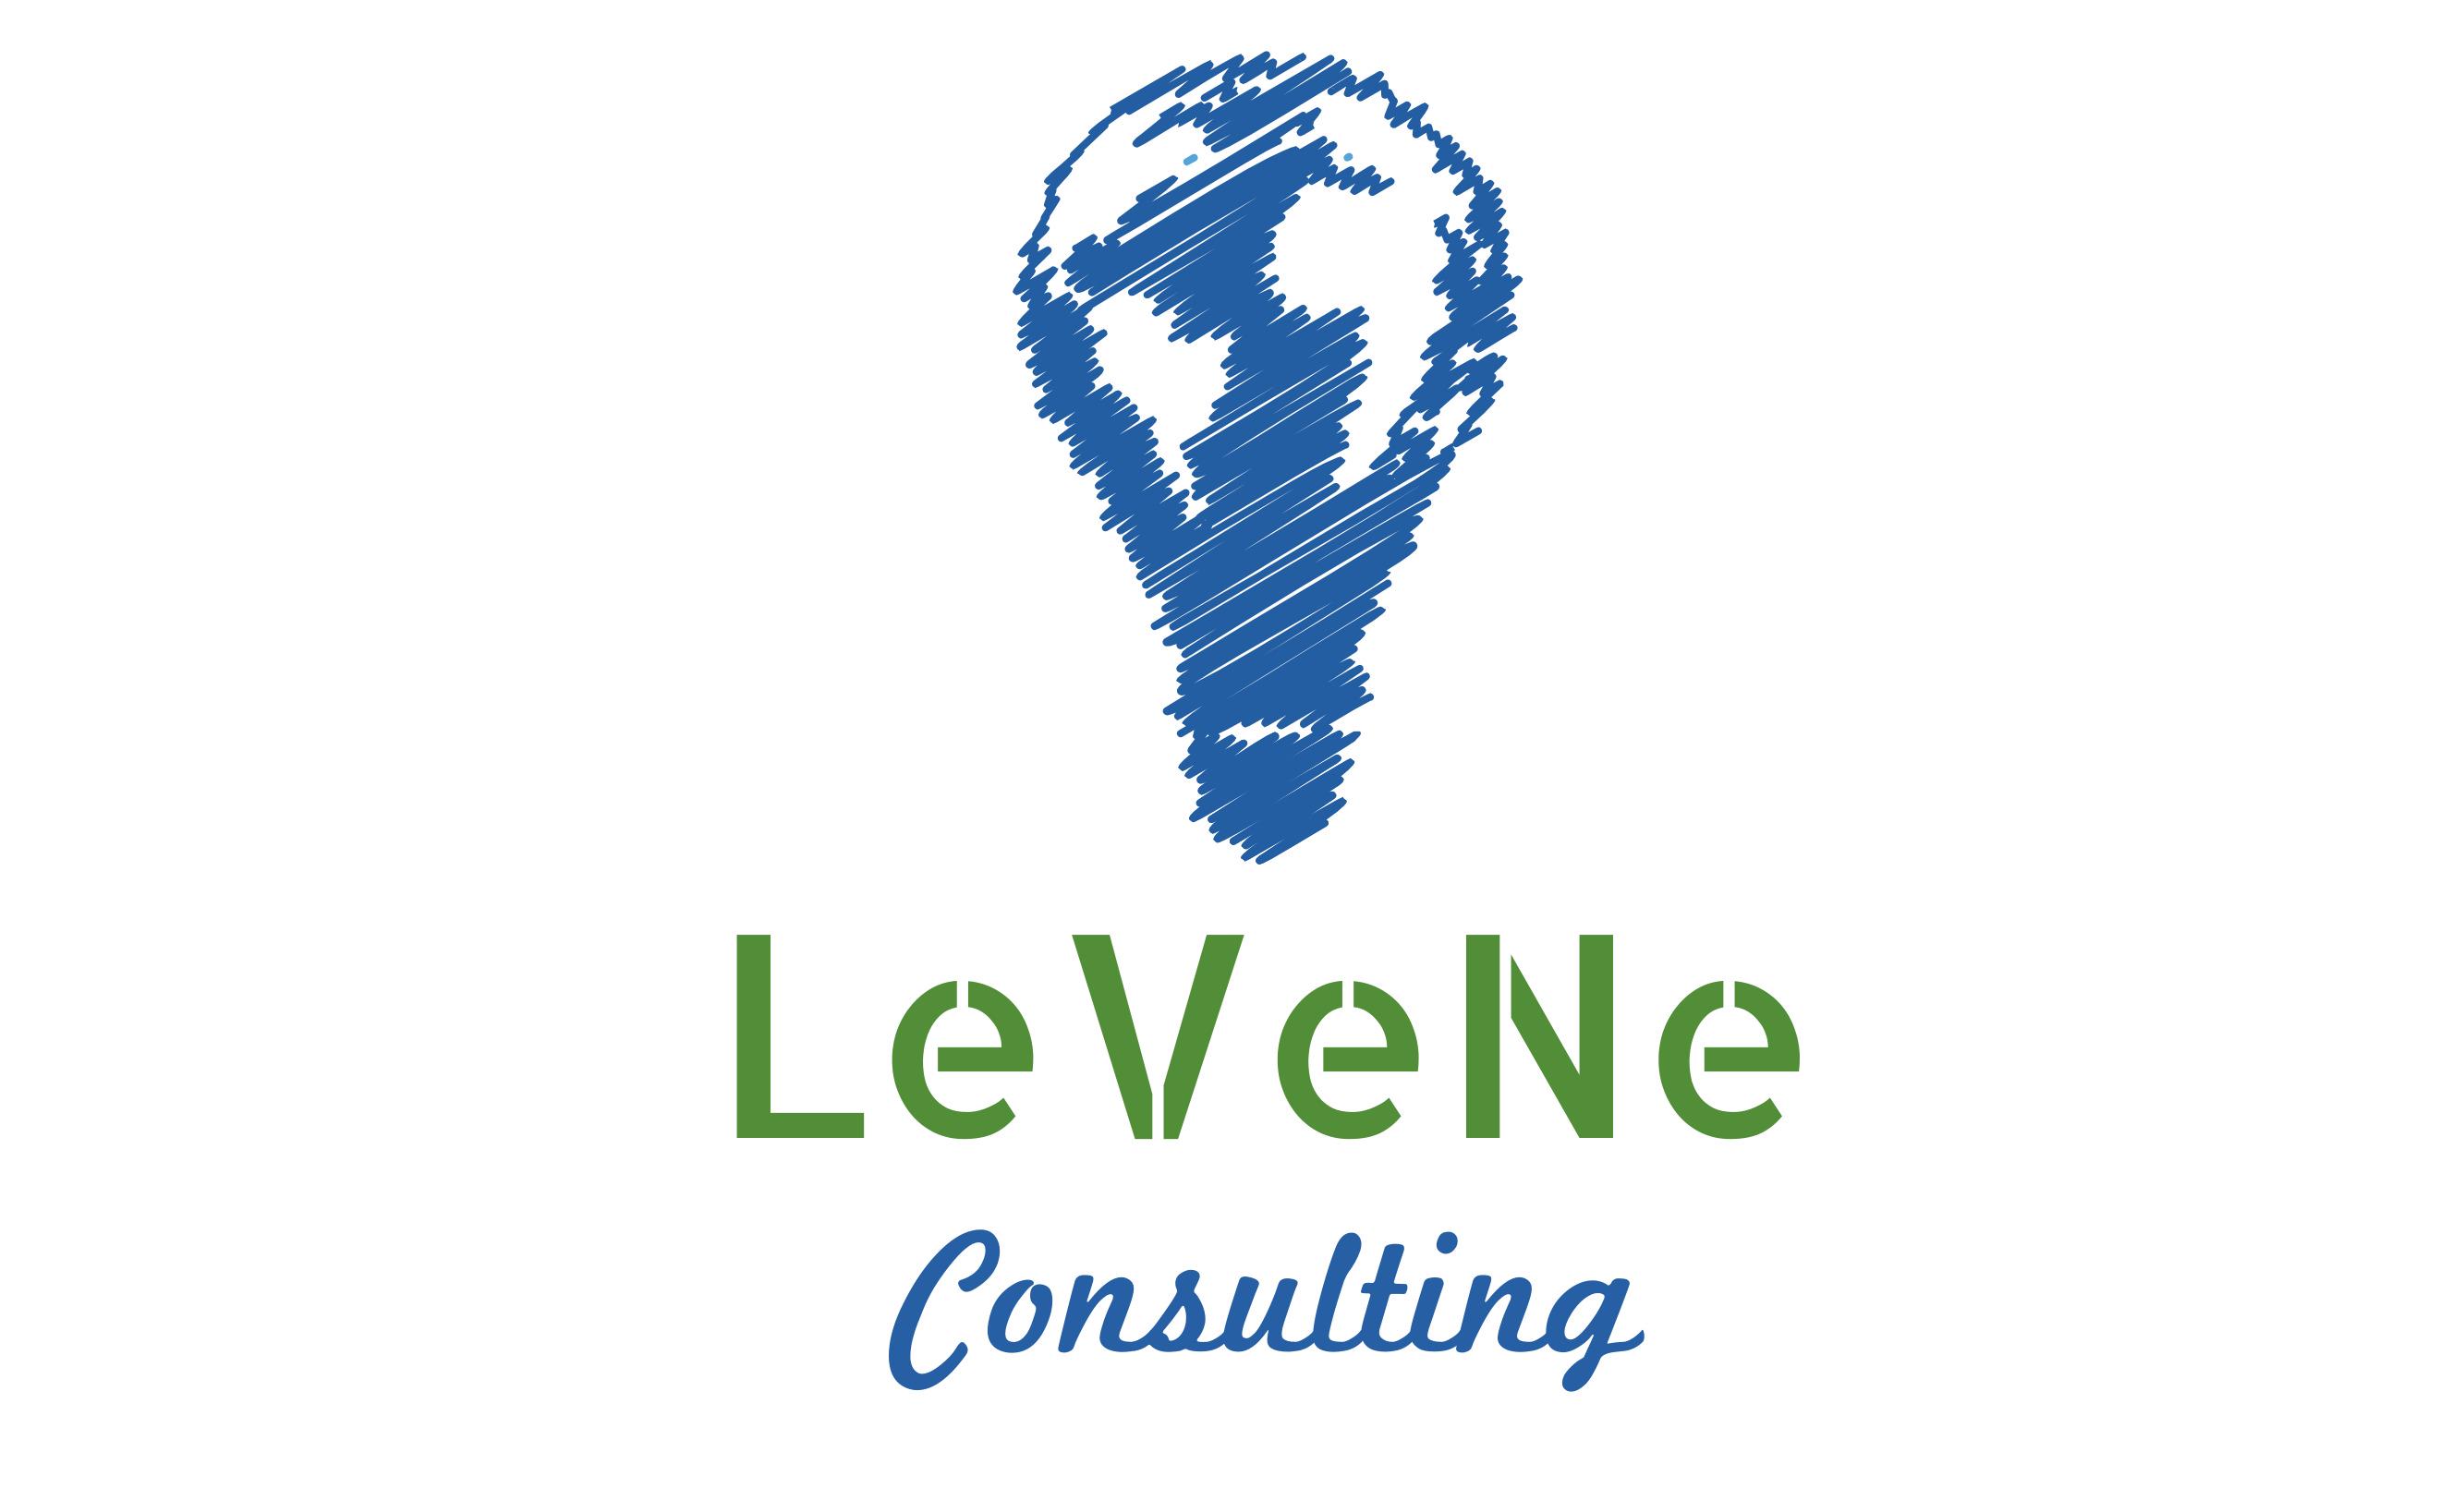 Levene Consulting profile on Qualified.One